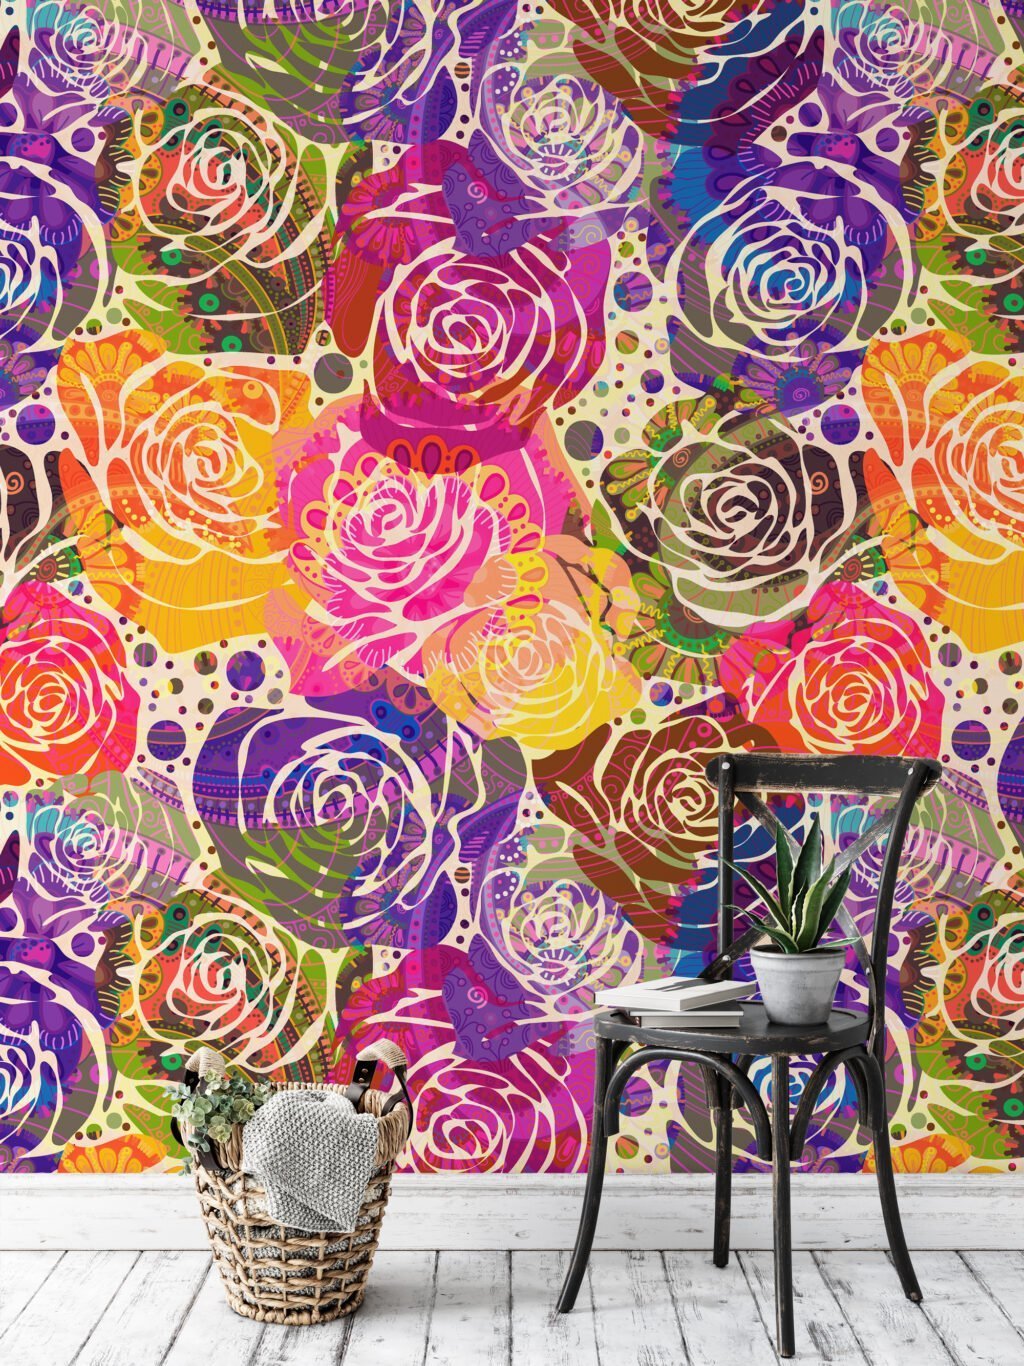 Abstract Colorful Roses Illustration Wallpaper, Vibrant Rose Collage Peel & Stick Wall Mural